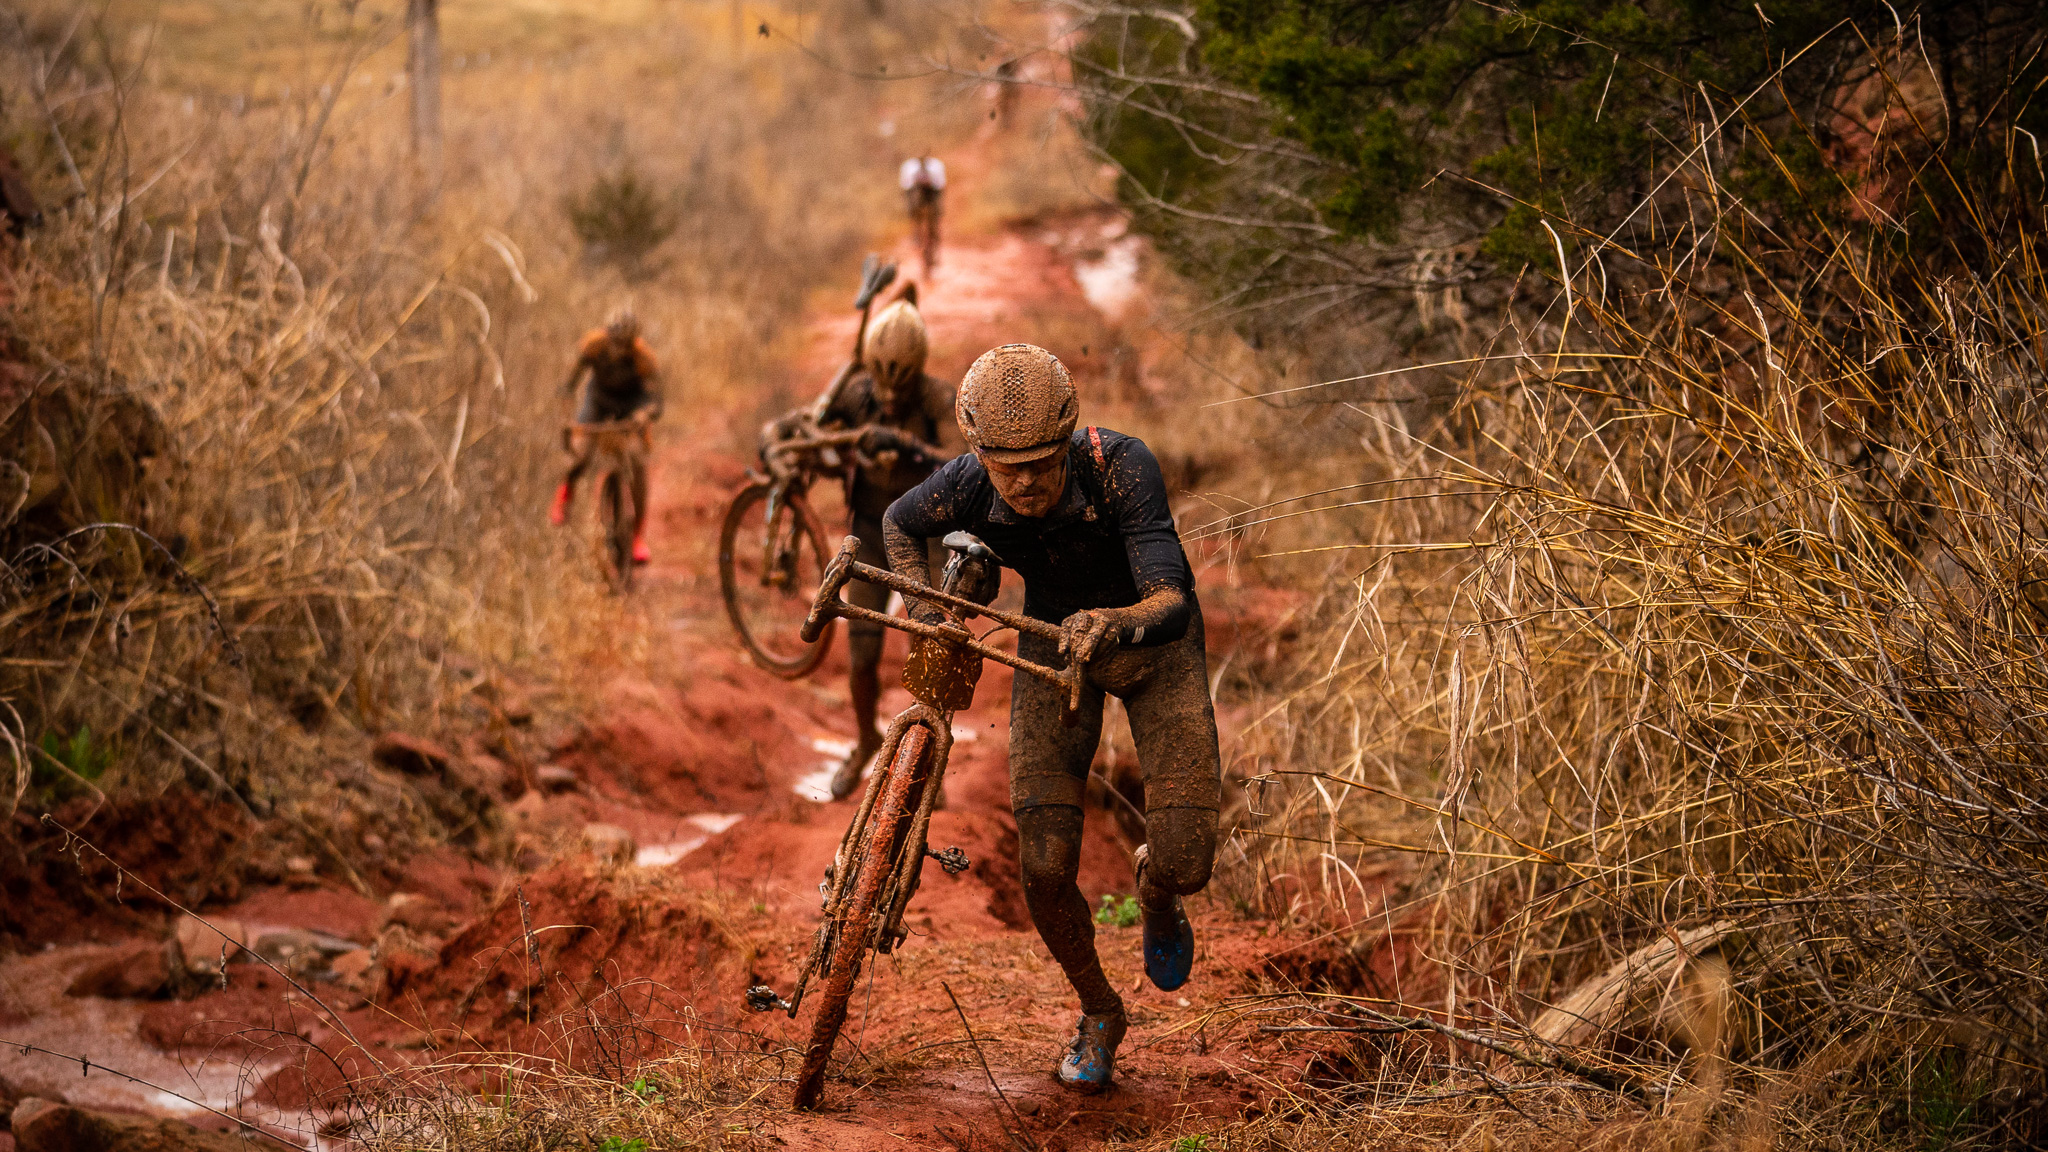 Five of the best US gravel bike events to ride in 2023 BikePerfect